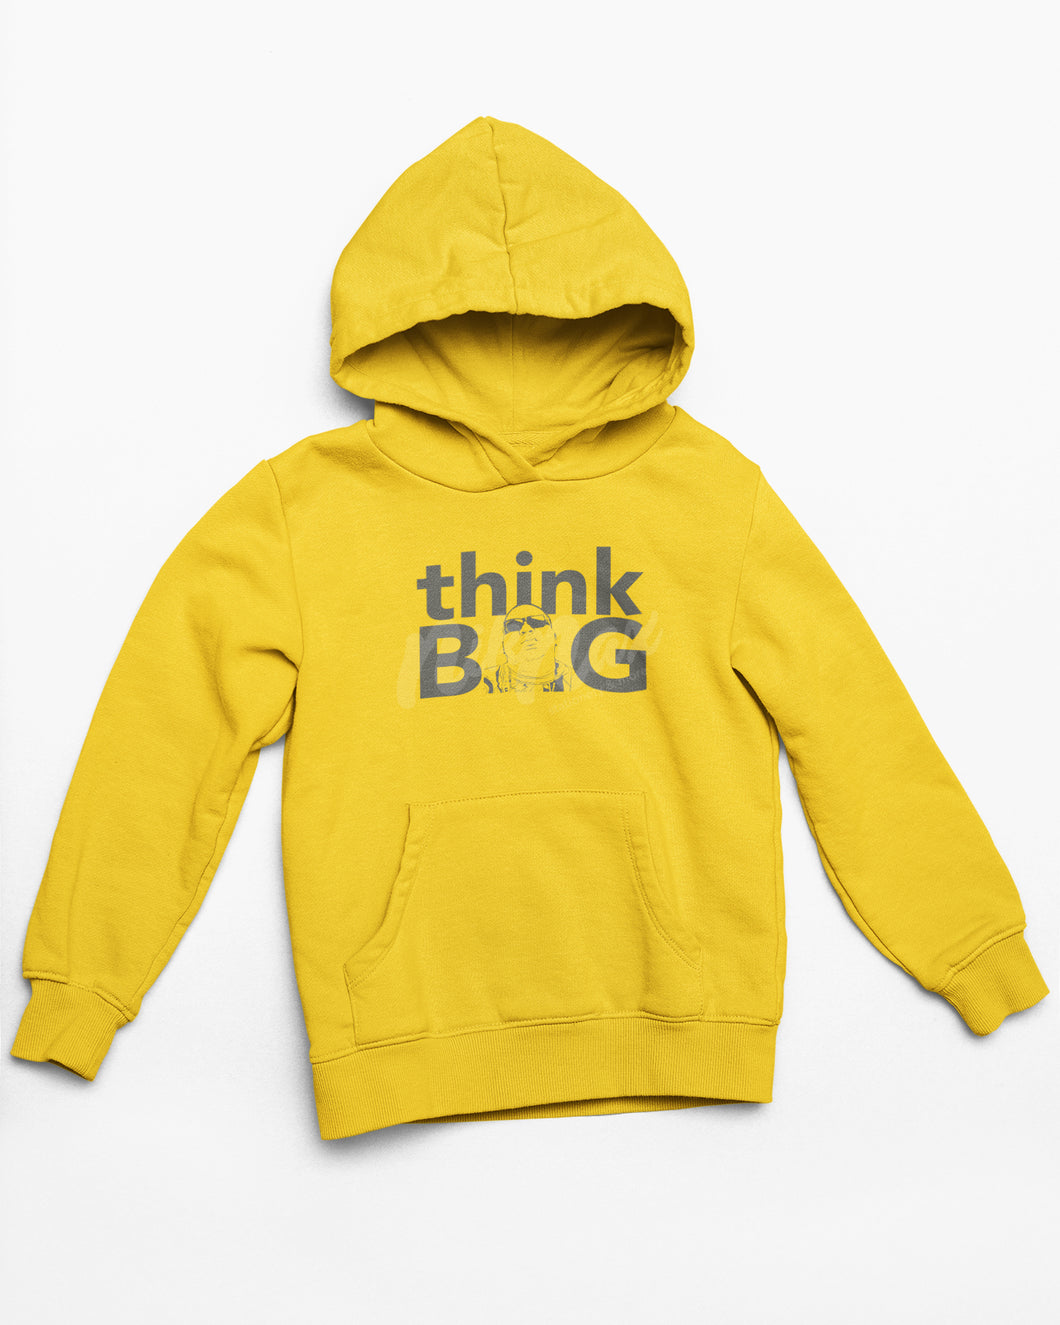 THINK BIG HOODIE (MULTIPLE COLORS AVAILABLE)